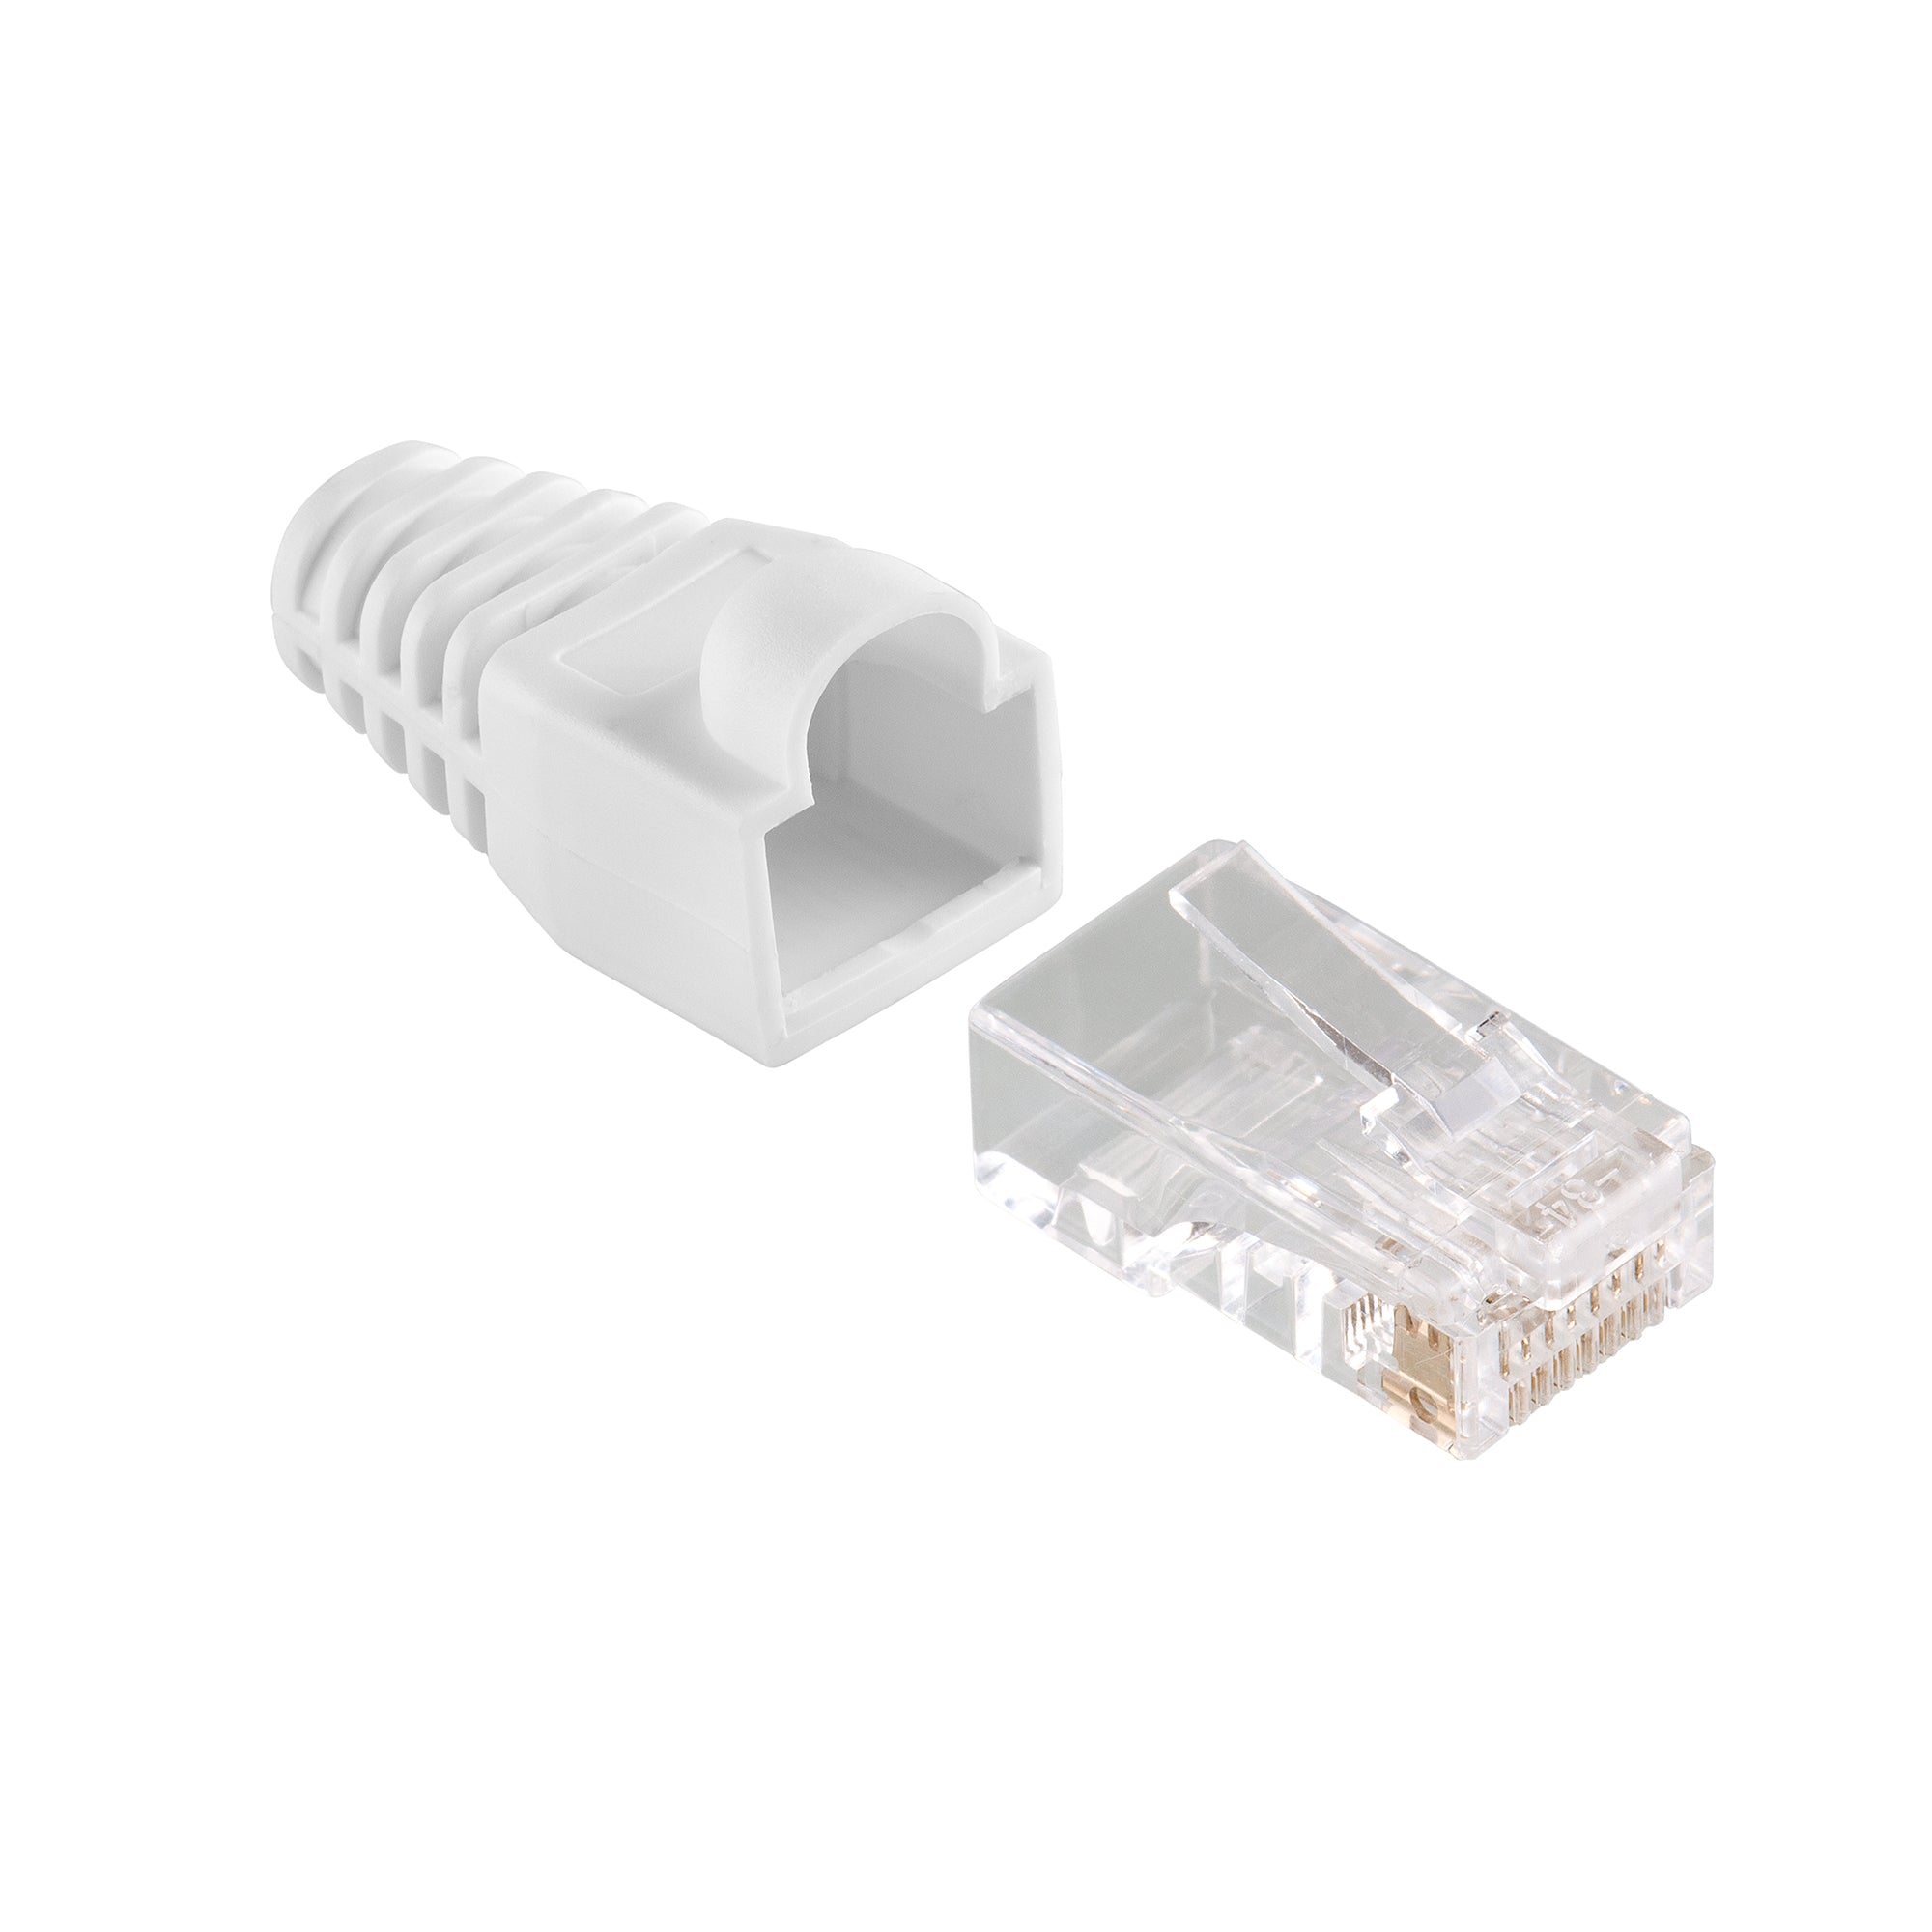 CAT6 RJ45 8P8C Plug With Boots - 10 Pack